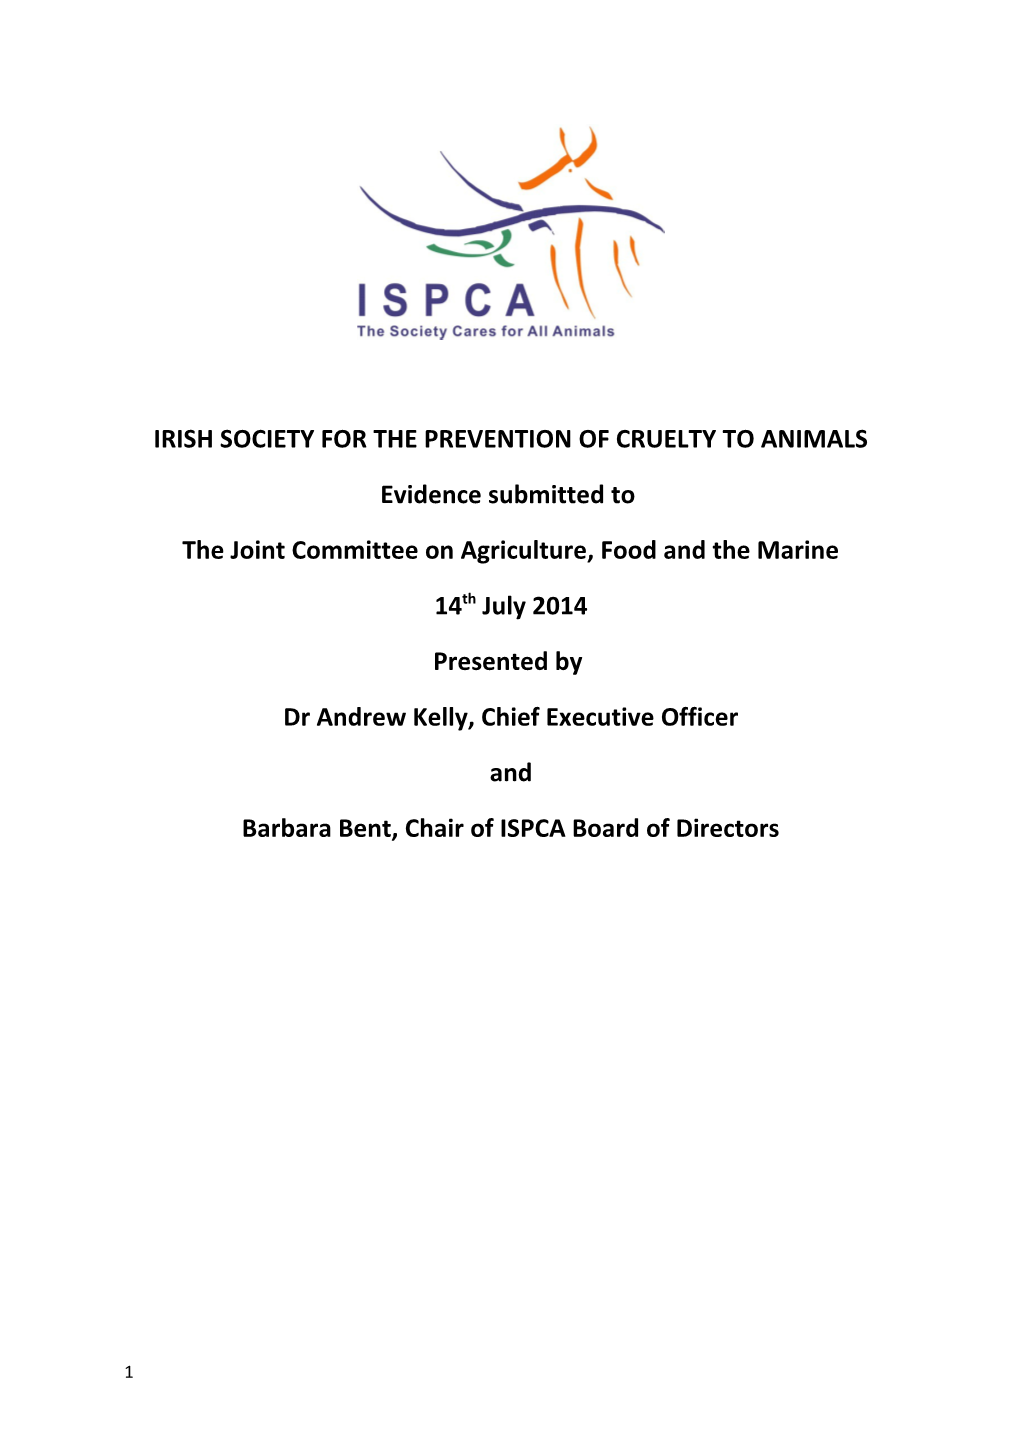 Irish Society for the Prevention of Cruelty to Animals